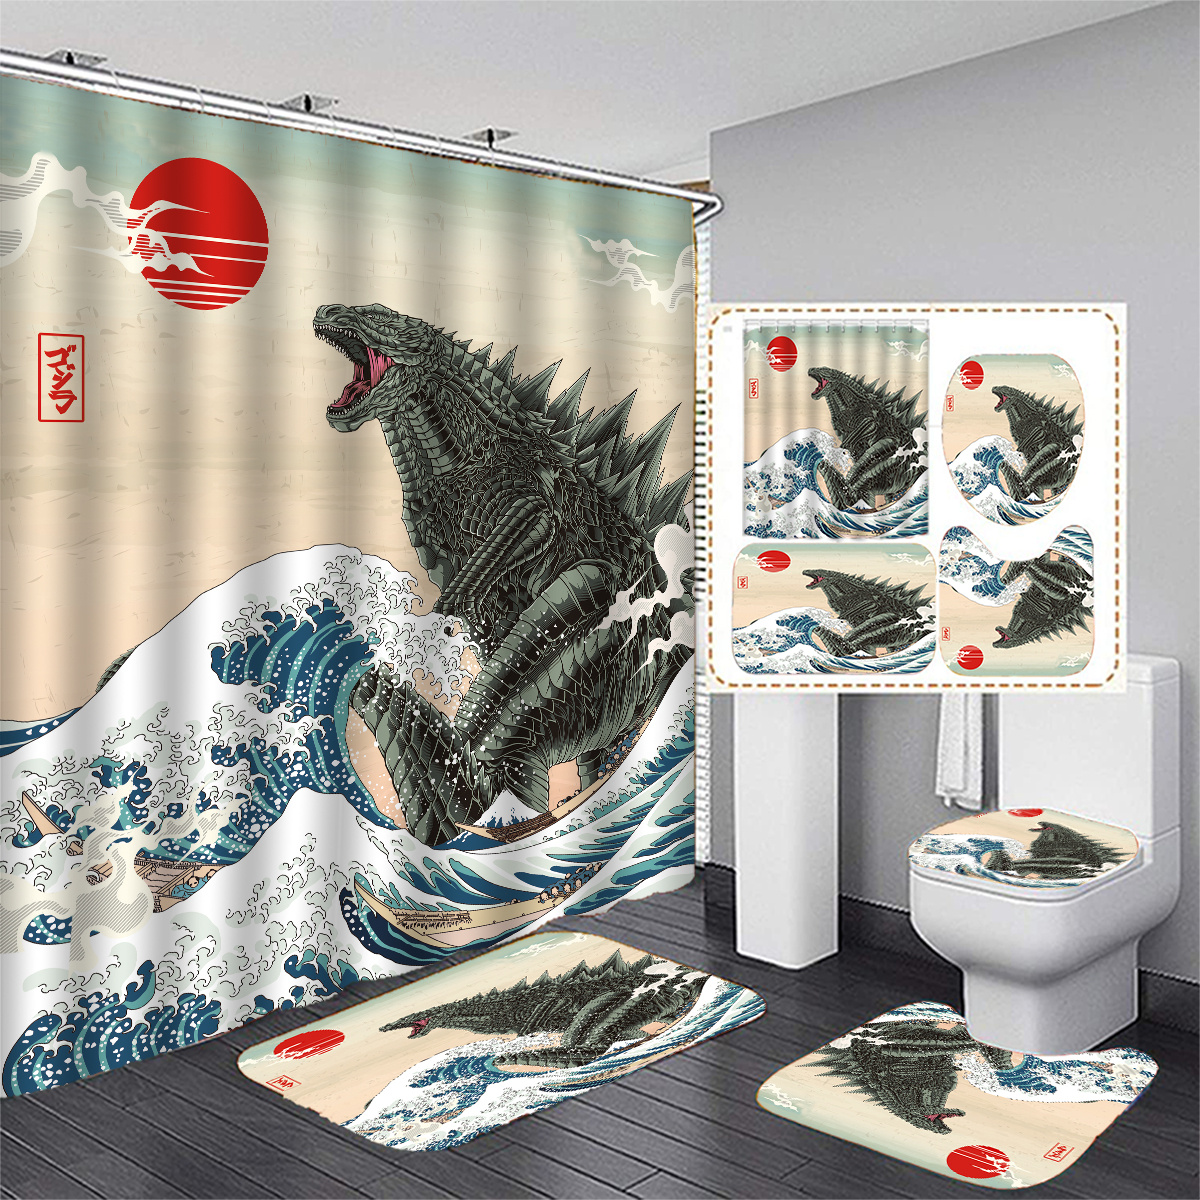 Amazon.com: Havvei Anime Bathroom Sets with Shower Curtain and Rugs and  Accessories Toilet Lid Cover and Bath Mat 4 PCS, Durable Waterproof Bath  Room Full Set Bathroom Decor for Teen Girls Boys